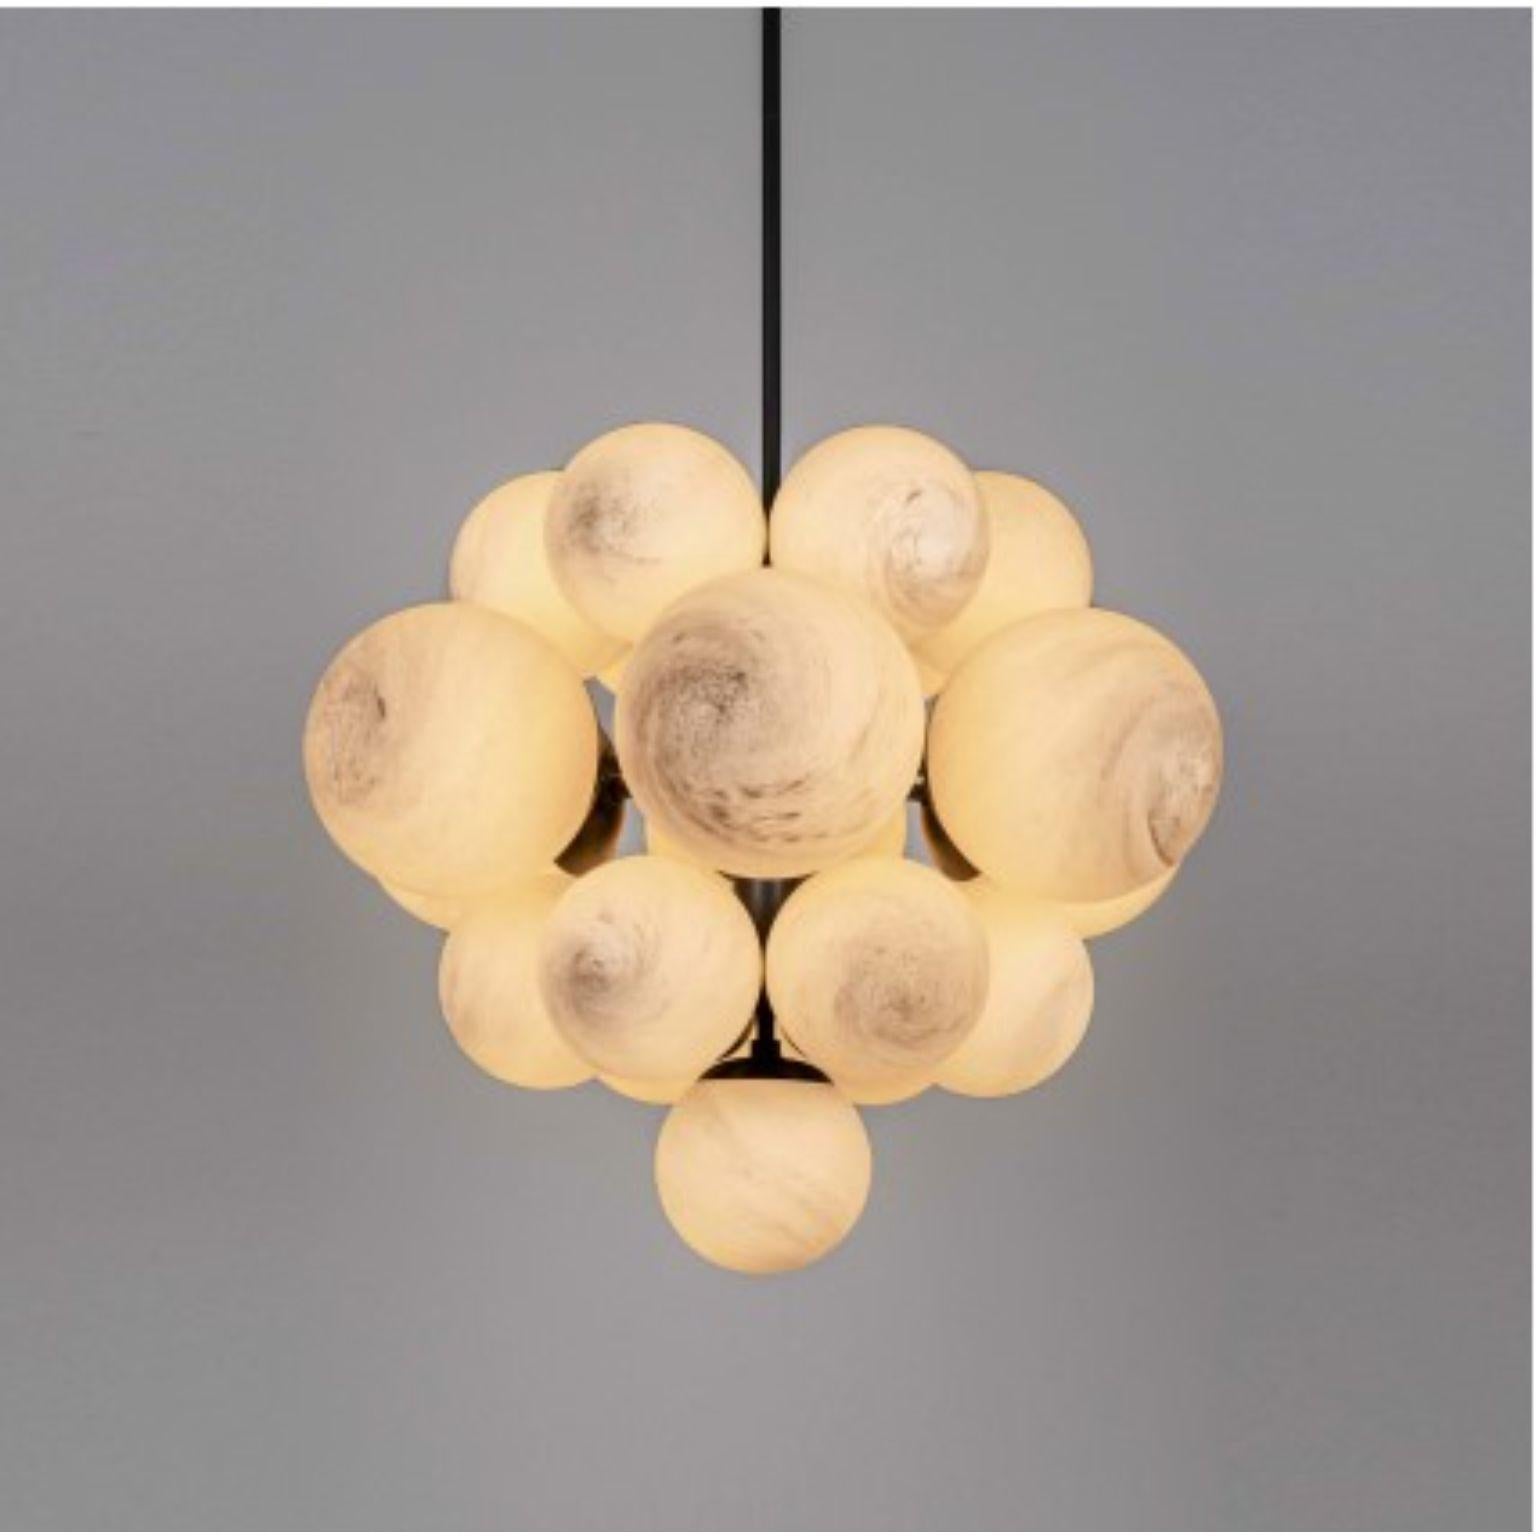 Nova chandelier by Schwung
Dimensions: D68.8 x H 153 cm
Materials: brass, opal glass
Weight: 19.4 kg

Finishes available: black gunmetal, polished nickel, brass
Other sizes available.

 Schwung is a german word, and loosely defined, means